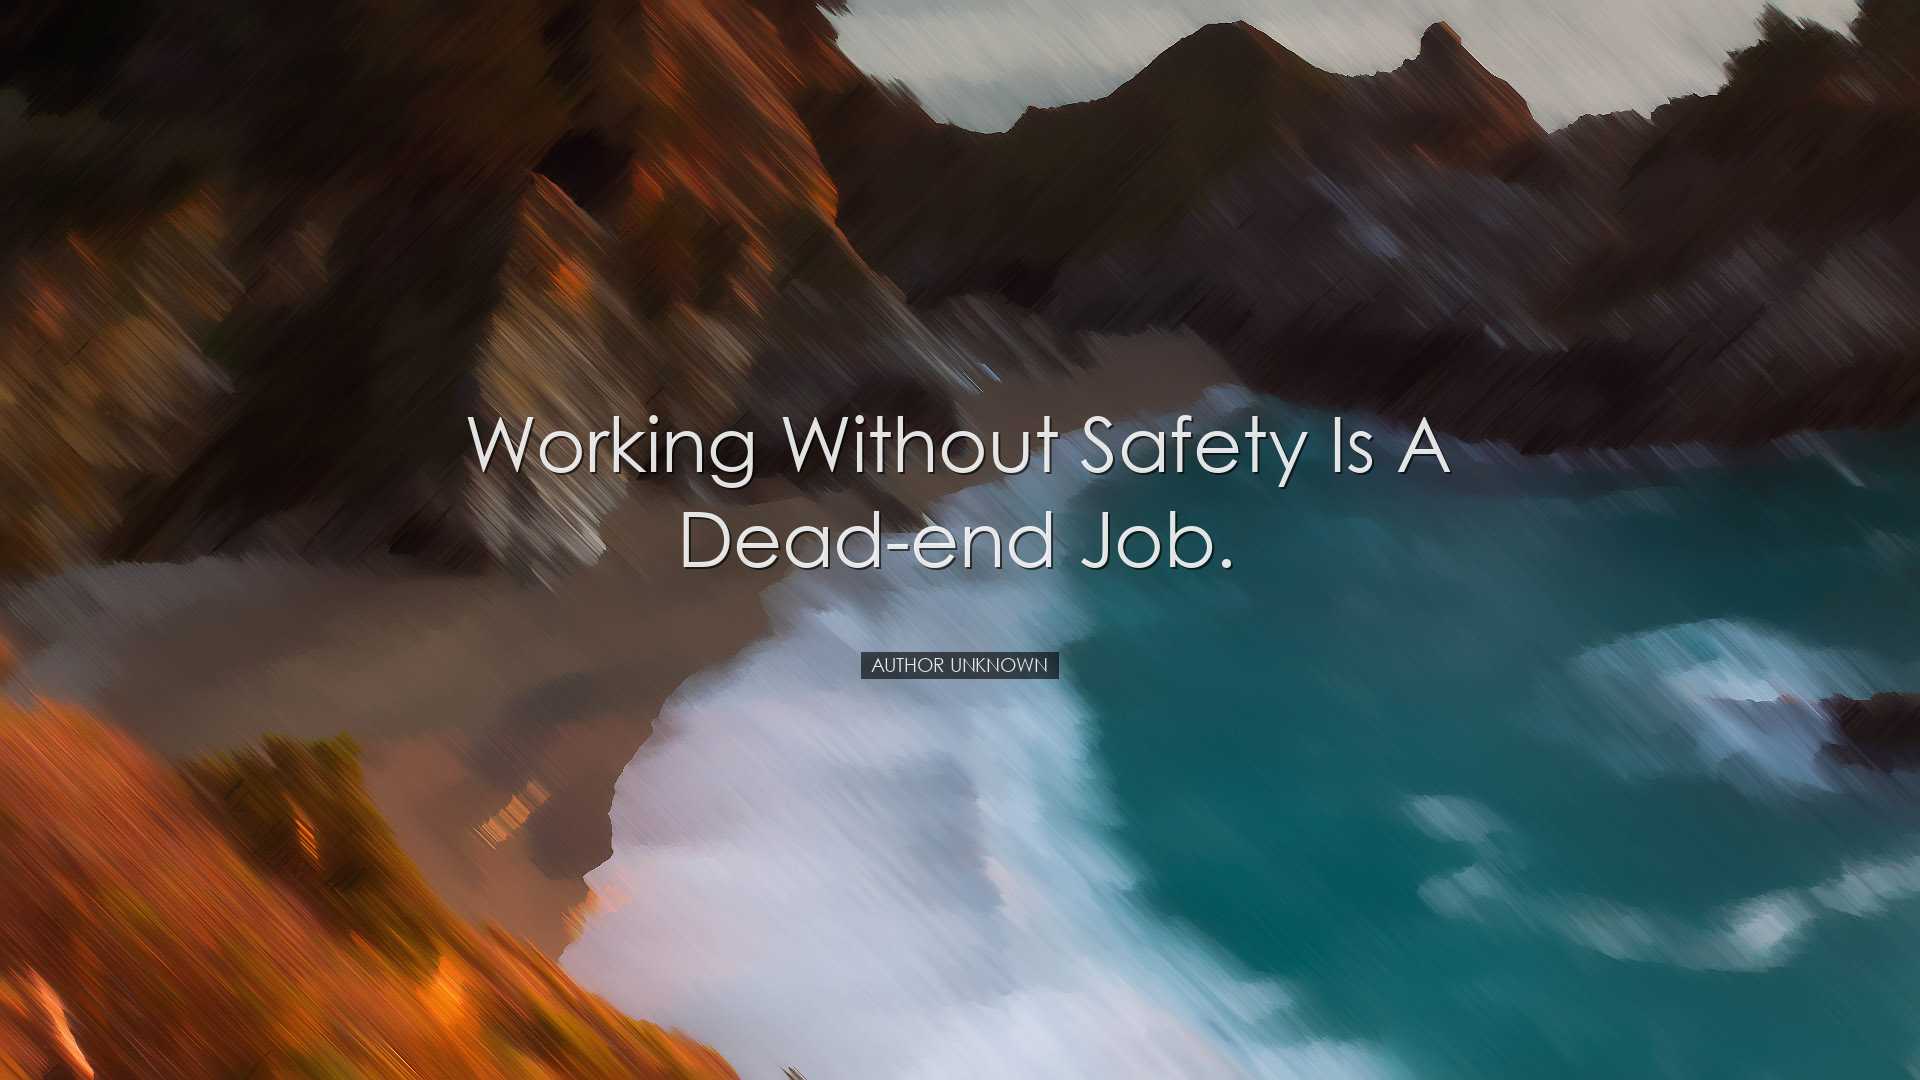 Working without safety is a dead-end job. - Author unknown